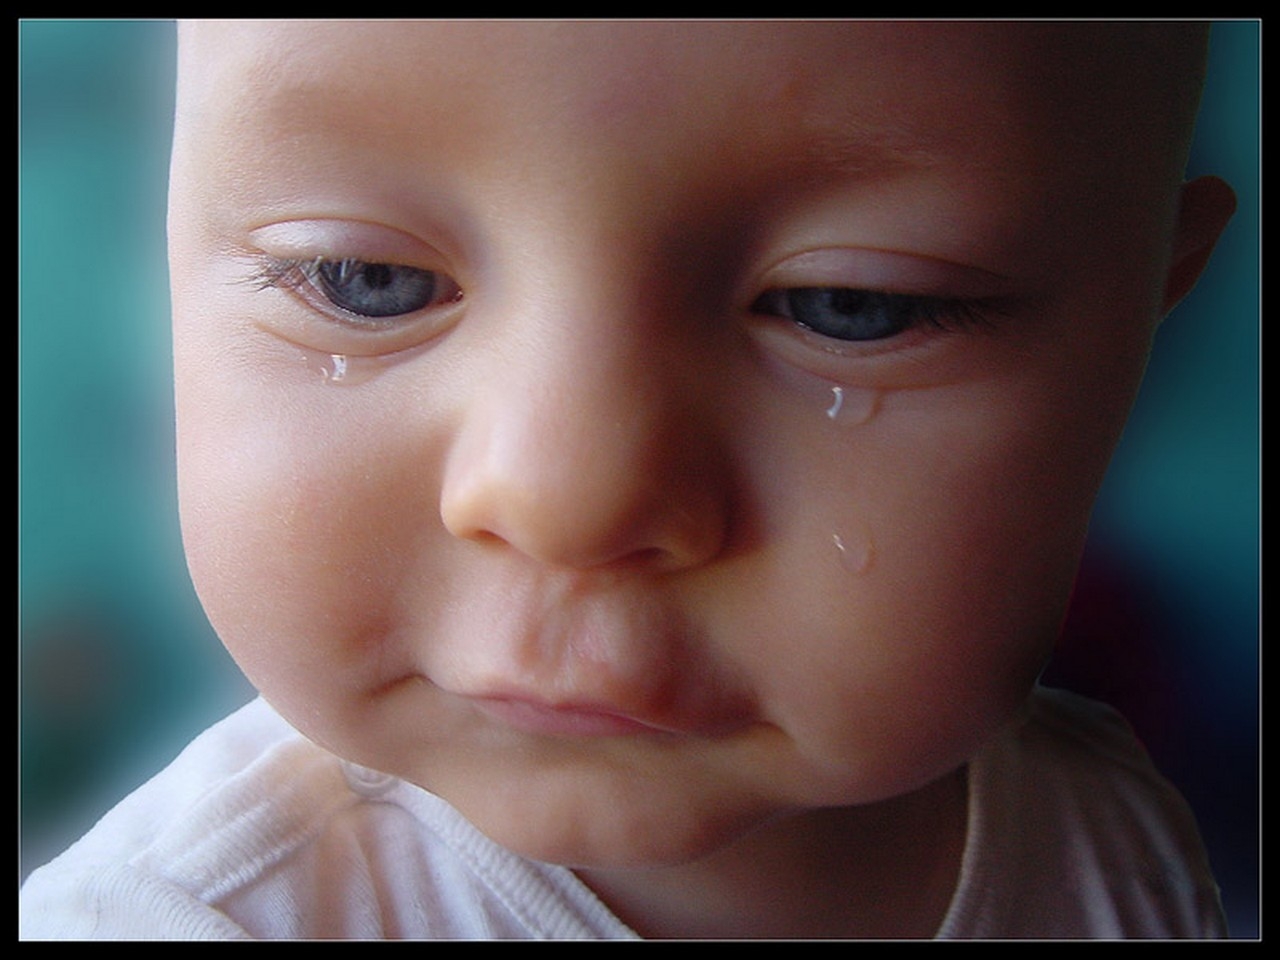 Http - //2 - Bp - Blogspot - Com/ S/s1600/baby Tears - Sweet Baby Crying - HD Wallpaper 